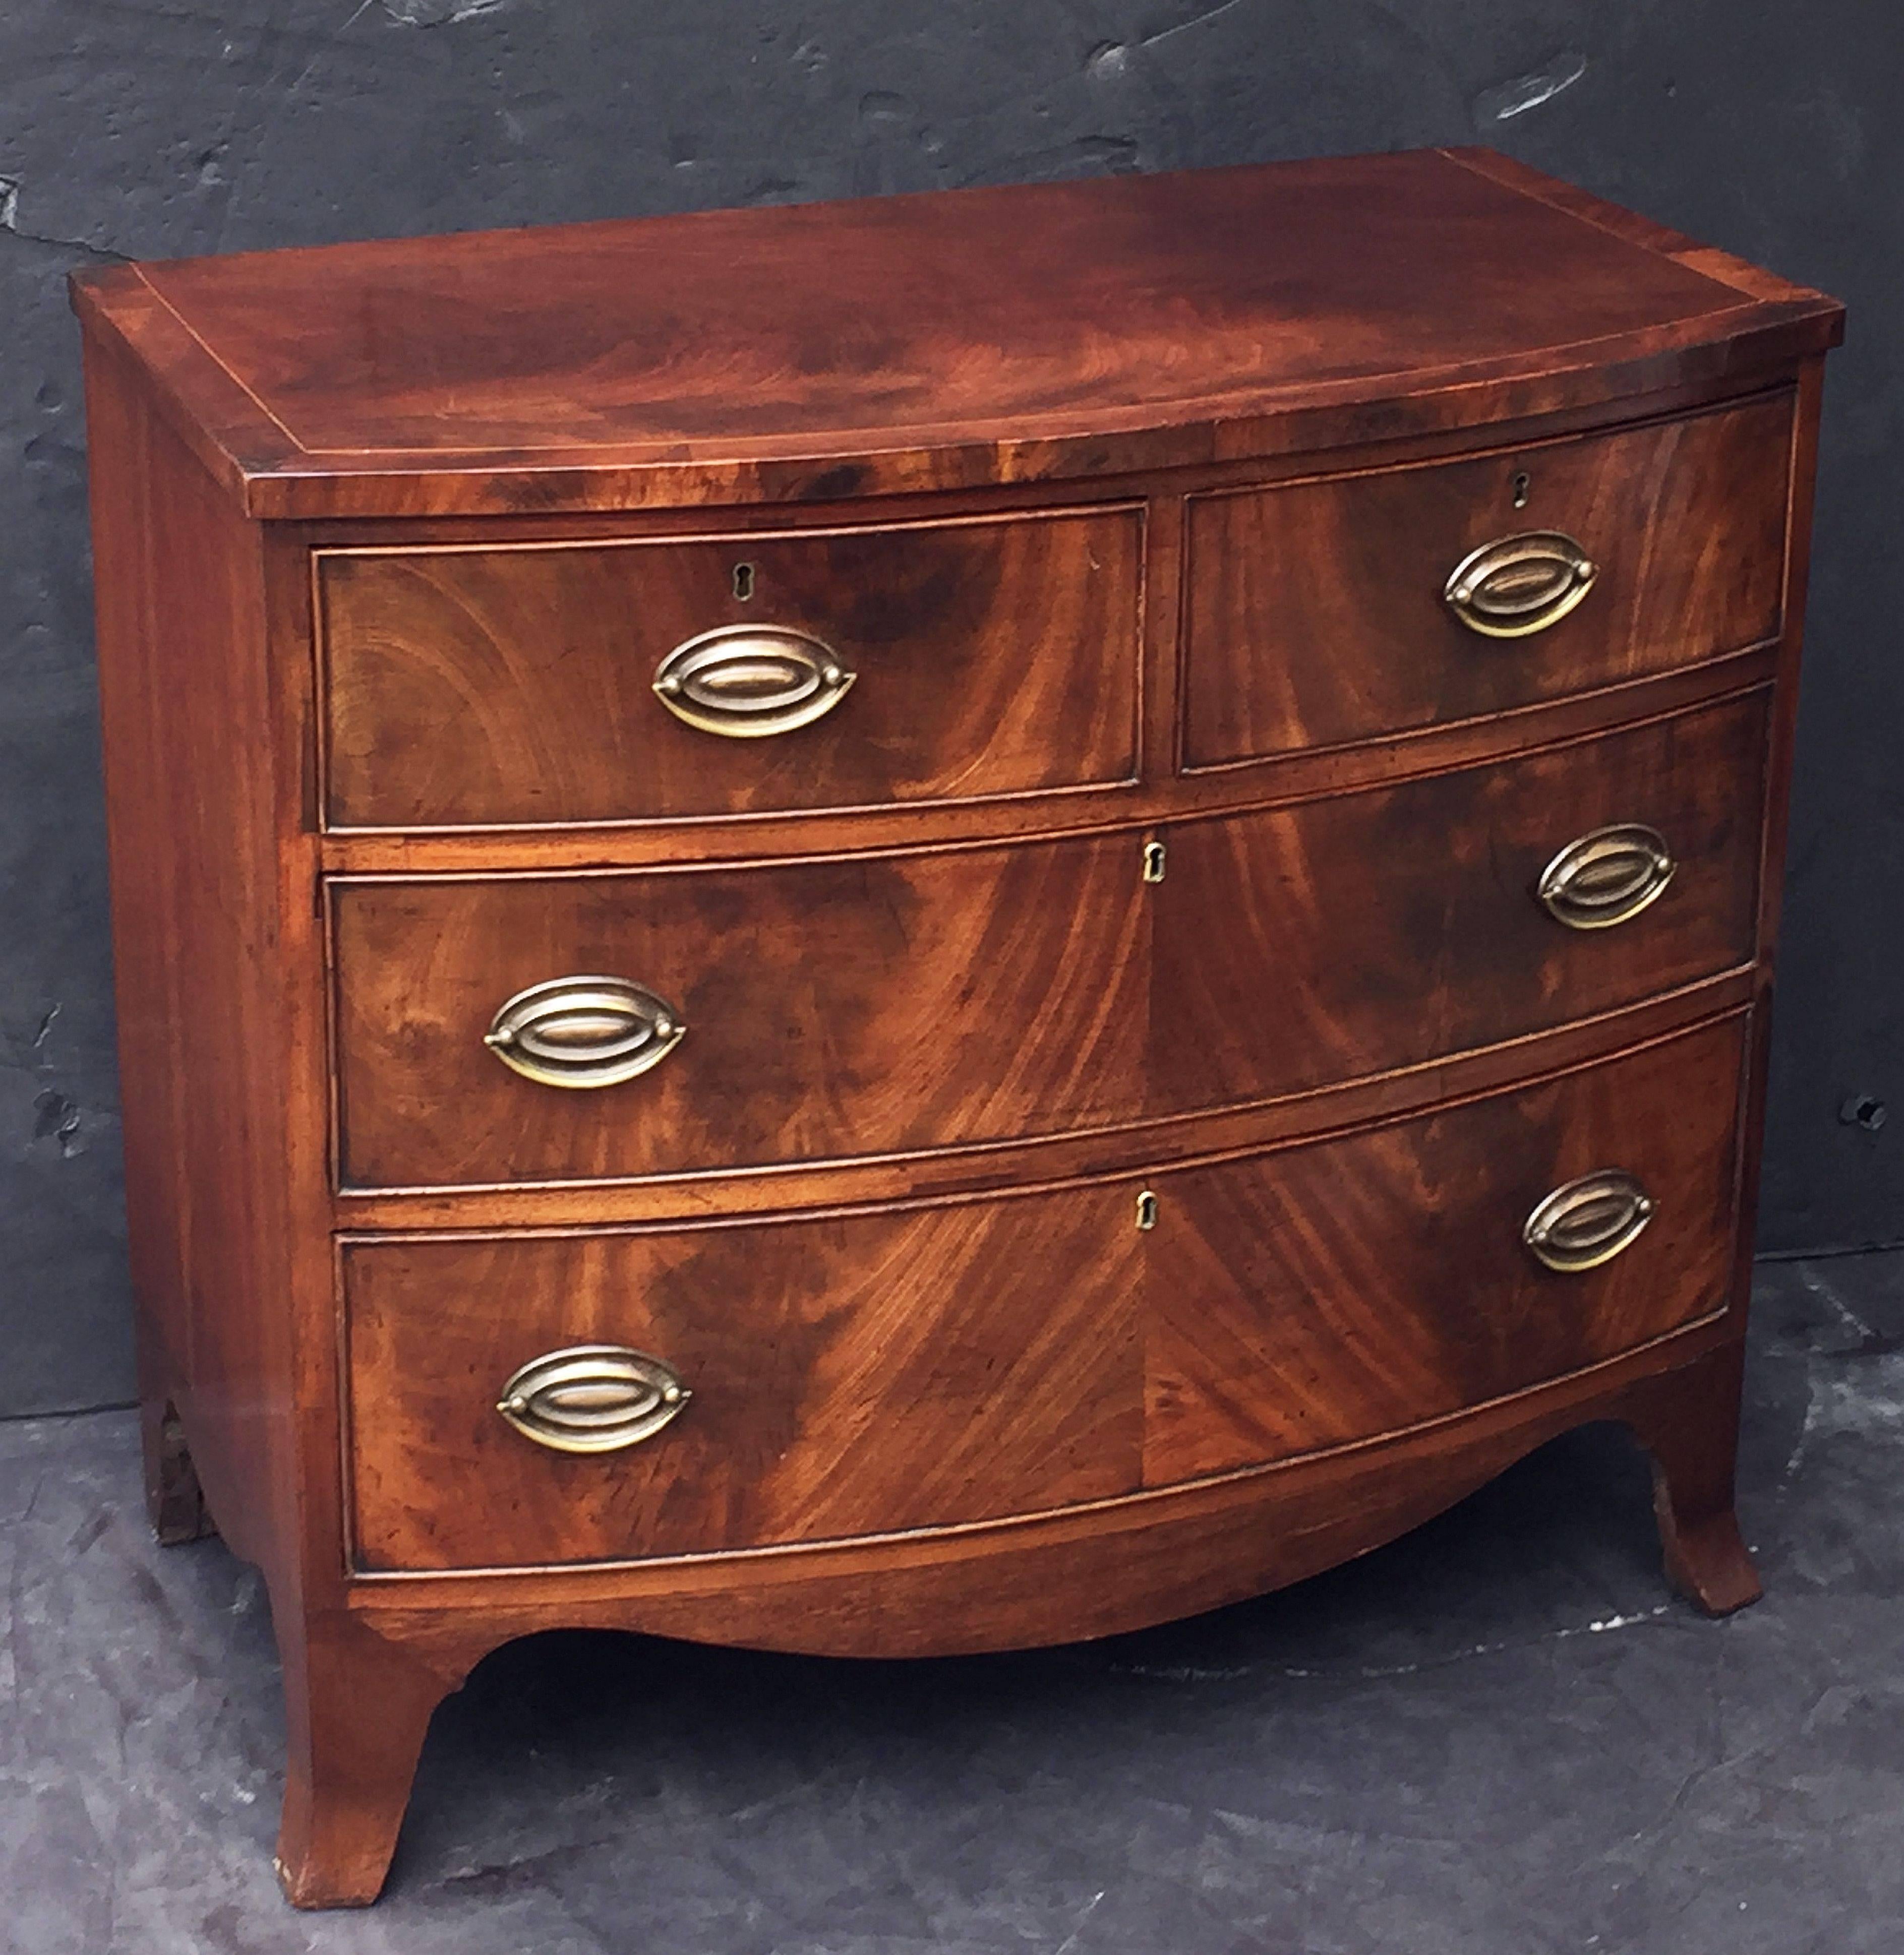 A handsome English bow-front chest of drawers of mahogany, featuring a bowed top over a frieze of two small beaded drawers and two beaded long drawers, with oval brass pulls, and set upon a serpentine splayed foot base.
The drawers showing